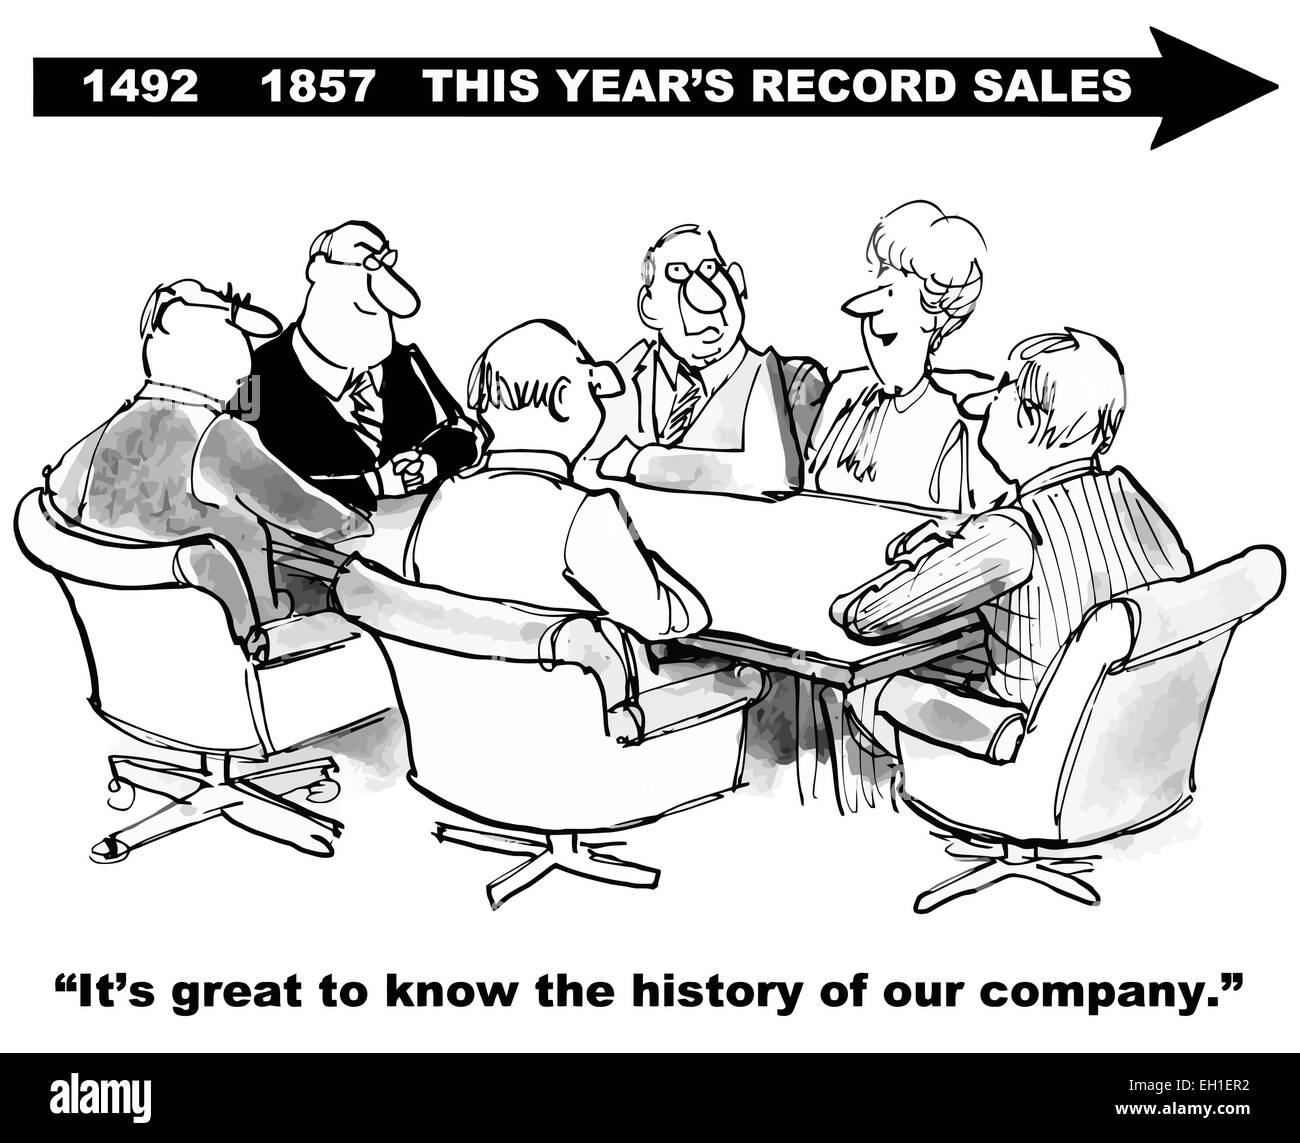 Cartoon of business meeting and timeline showing record sales achieved this year; great to know history of our company. Stock Vector